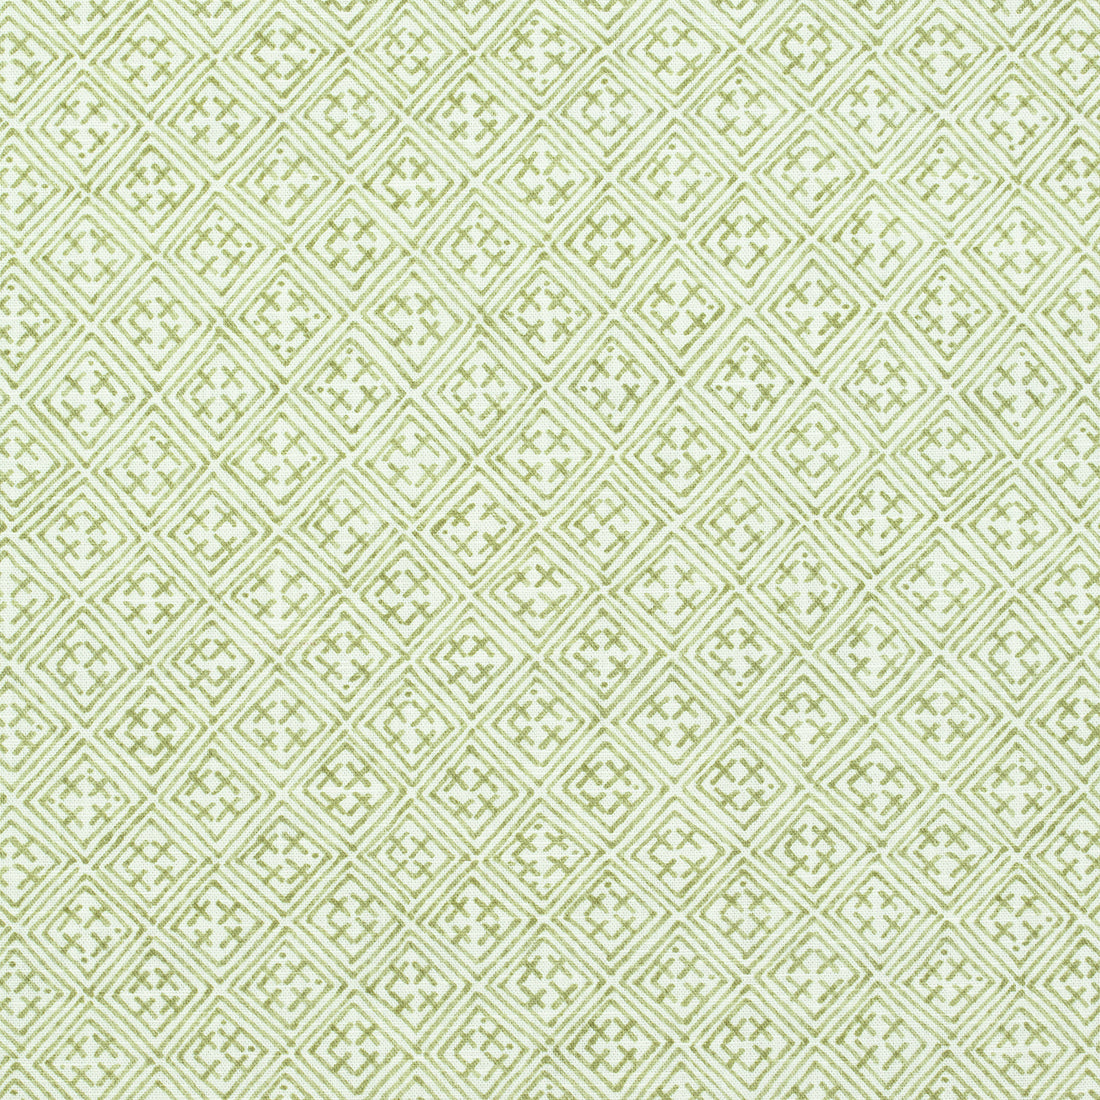 Laos fabric in spring green color - pattern number F972615 - by Thibaut in the Chestnut Hill collection